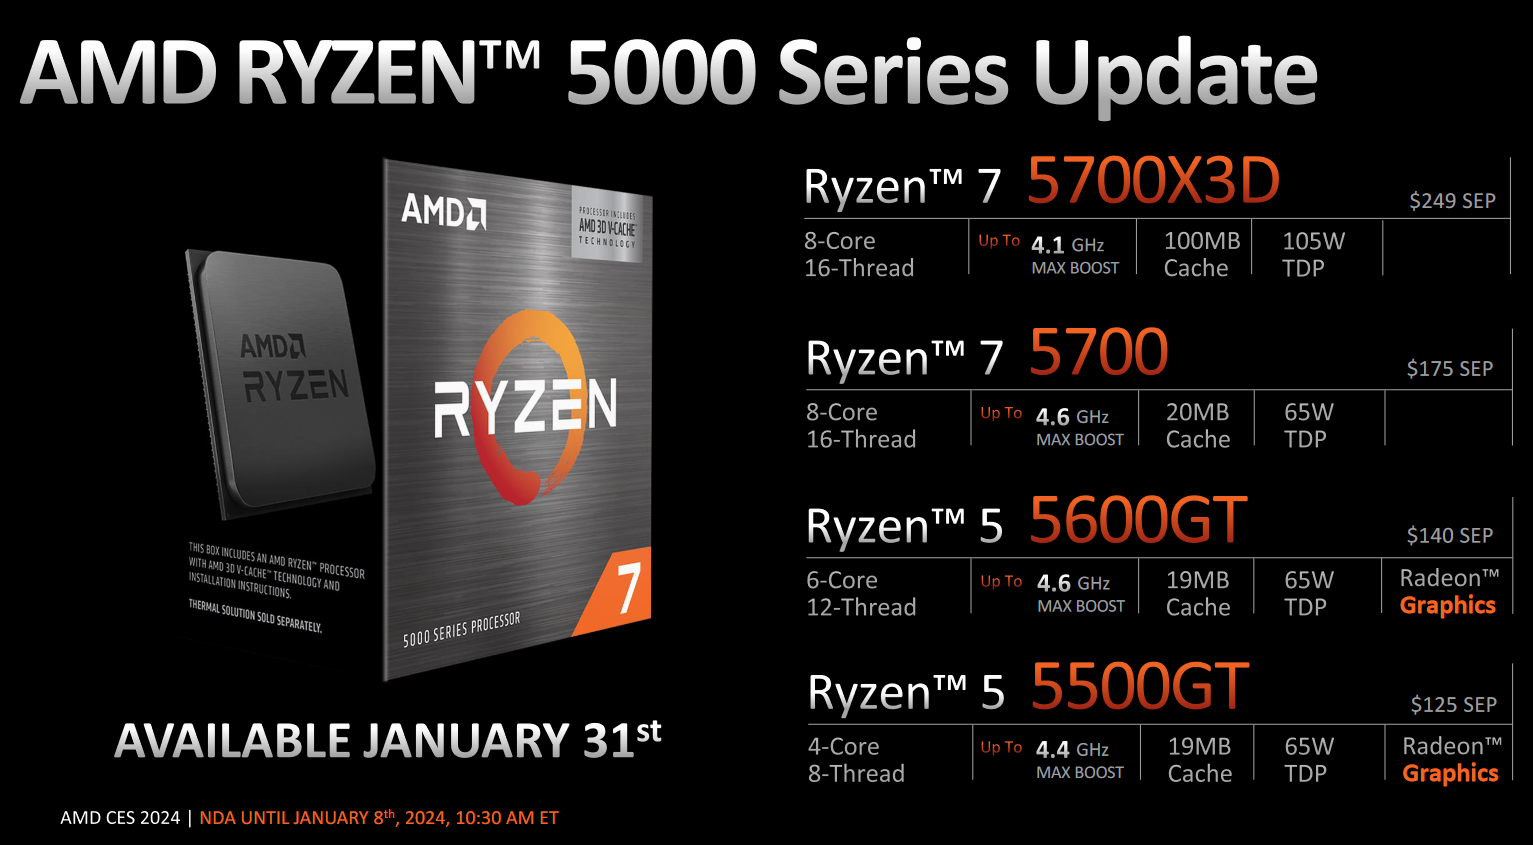 AMD might launch surprise Ryzen 5700X3D And 5500X3D Gaming CPUs